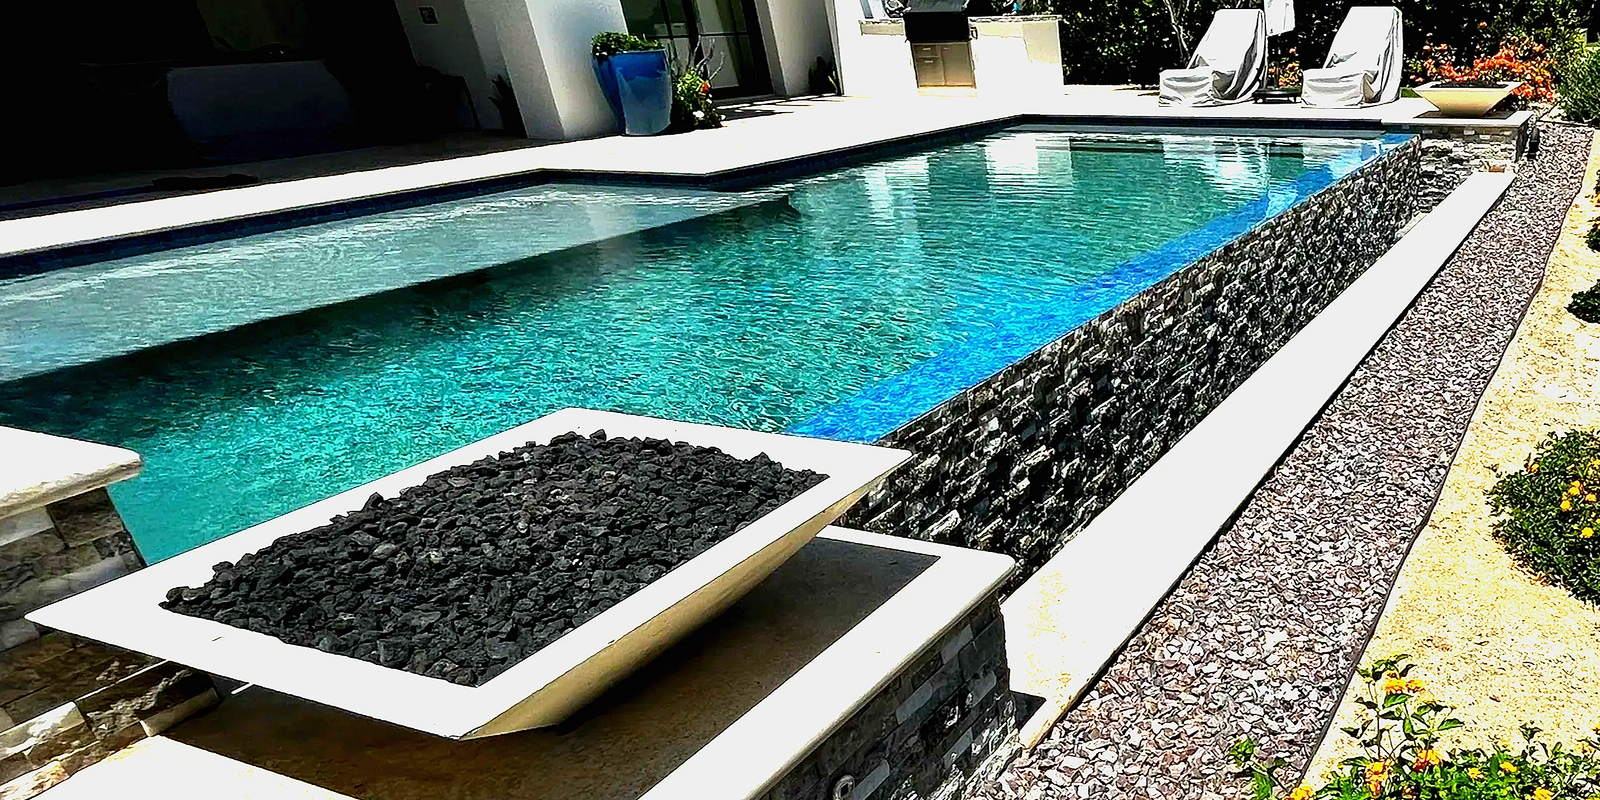 Pool with fire bowls